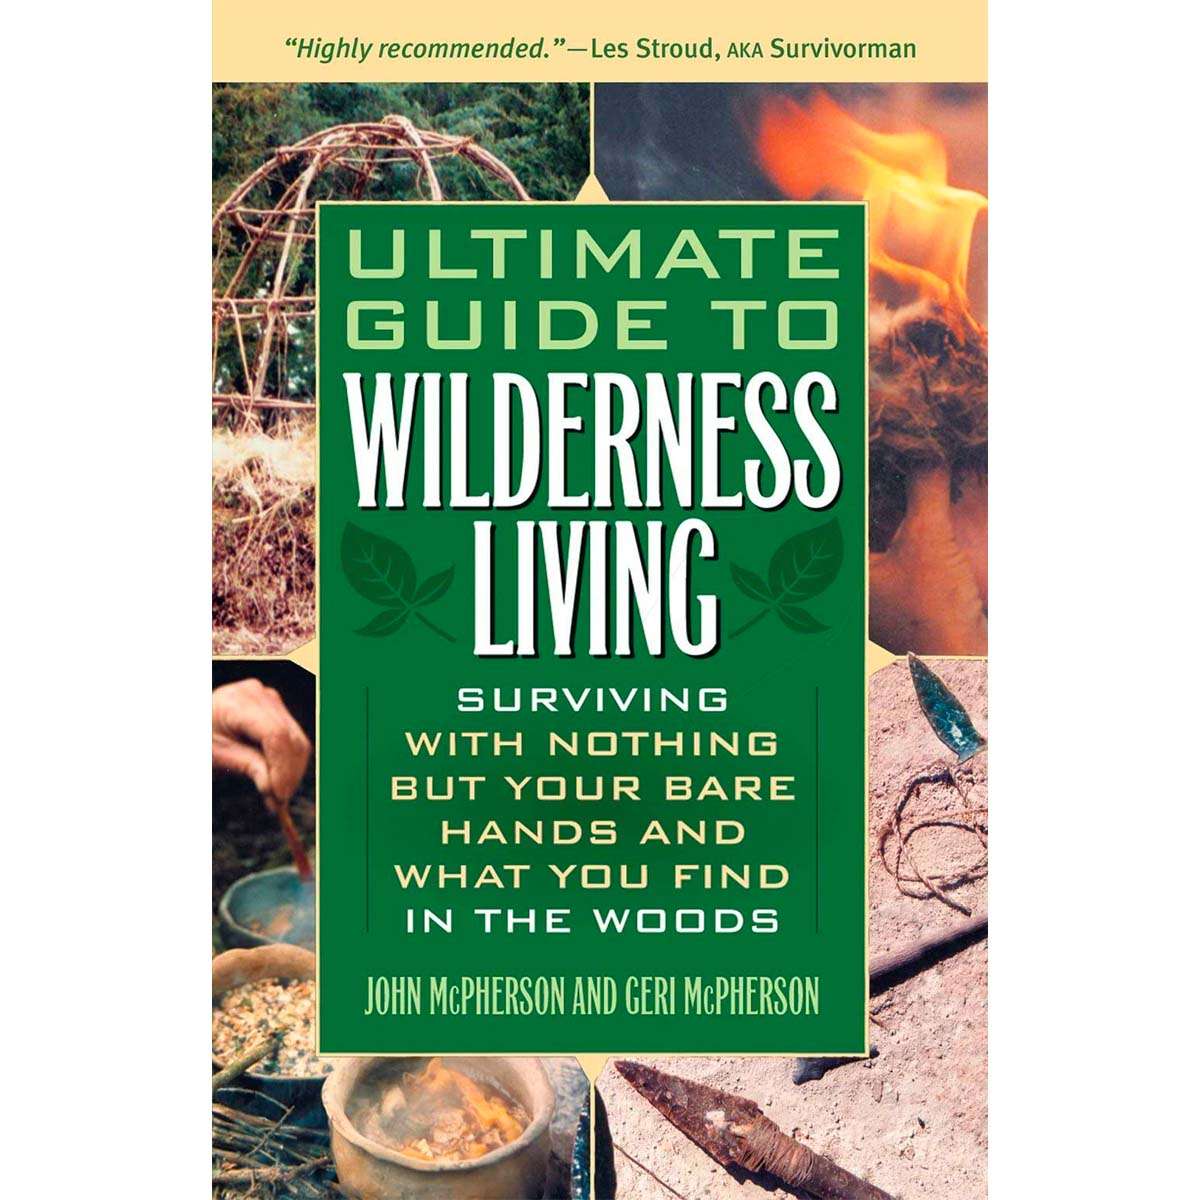 Ultimate Guide to Wilderness Living: Surviving with Nothing But Your Bare Hands and What You Find in the Woods Paperback